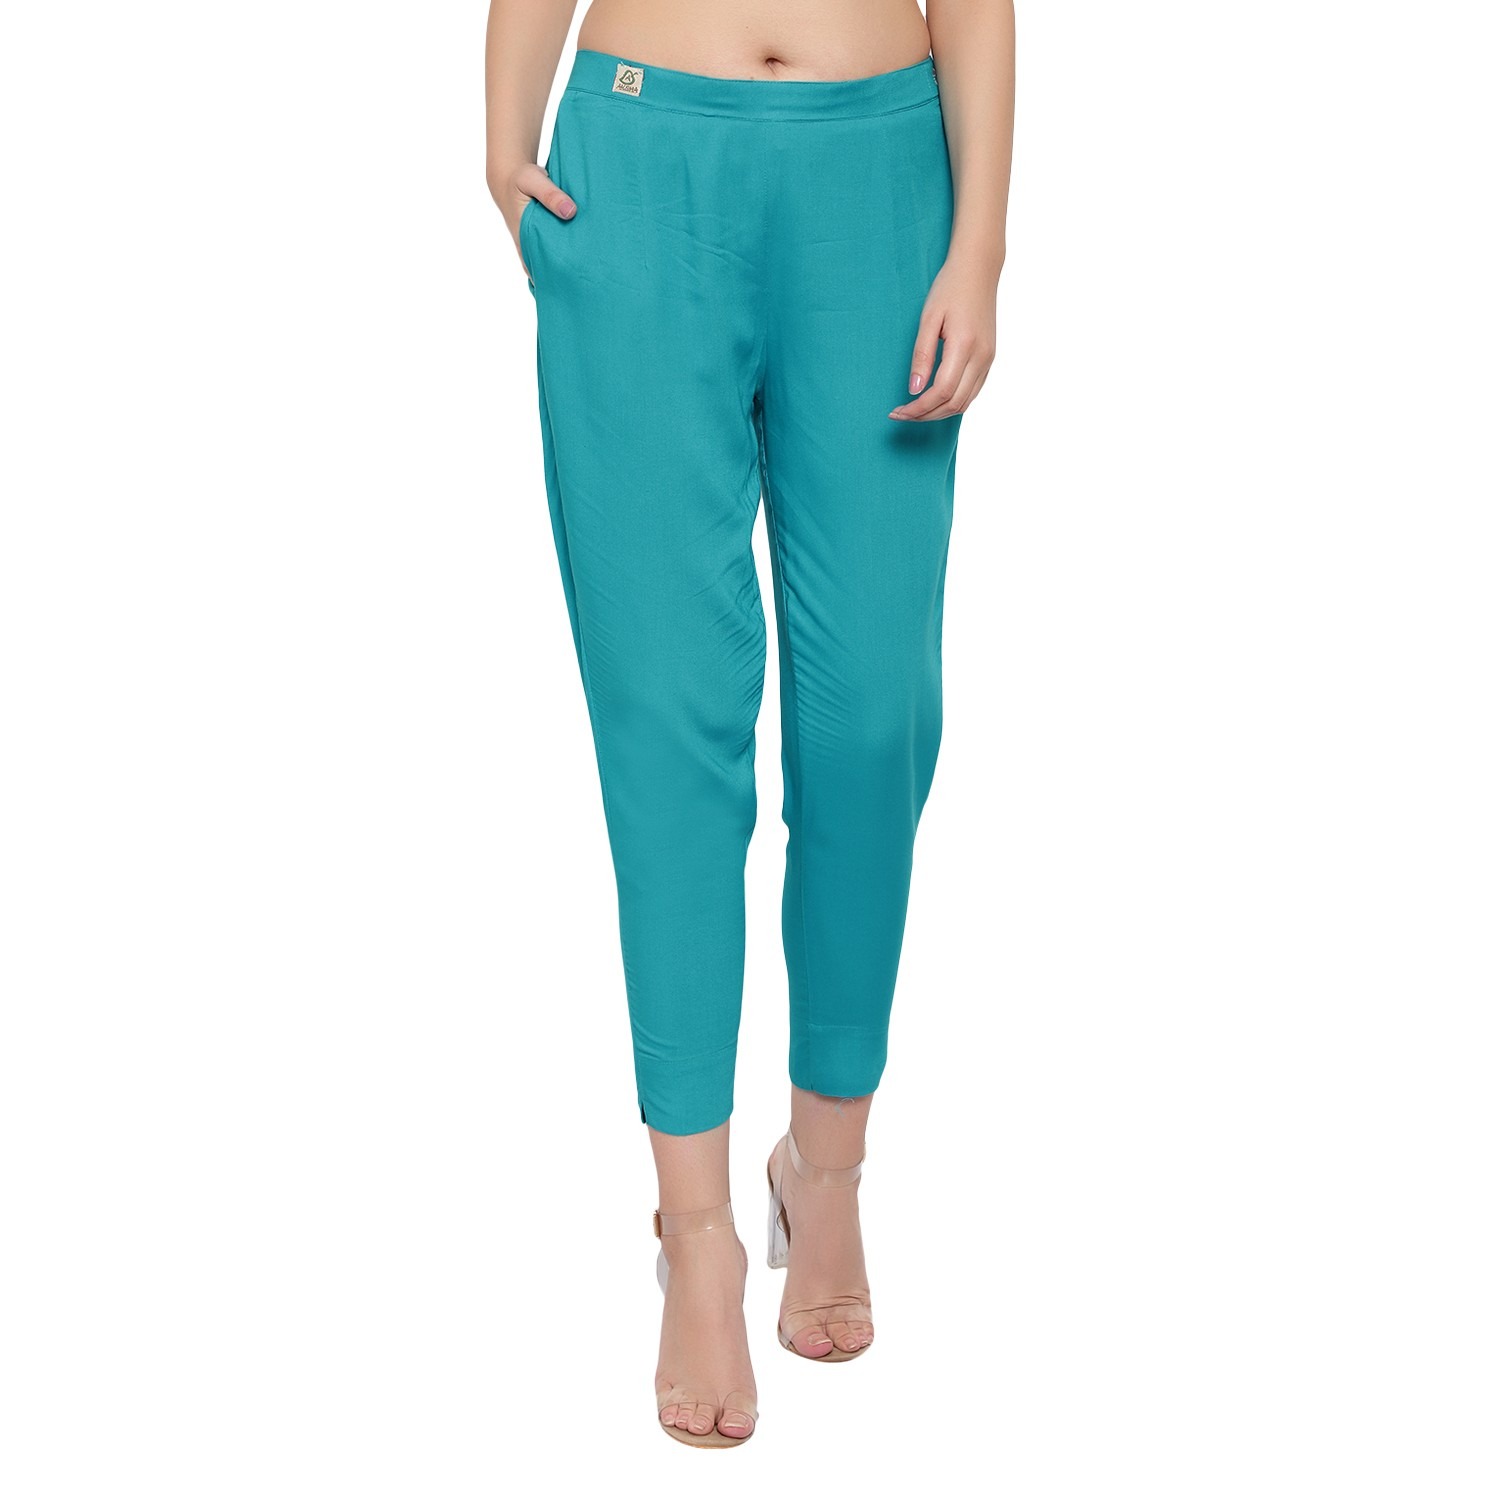 Buy Women Turquoise Trousers online in India Akshalifestyle